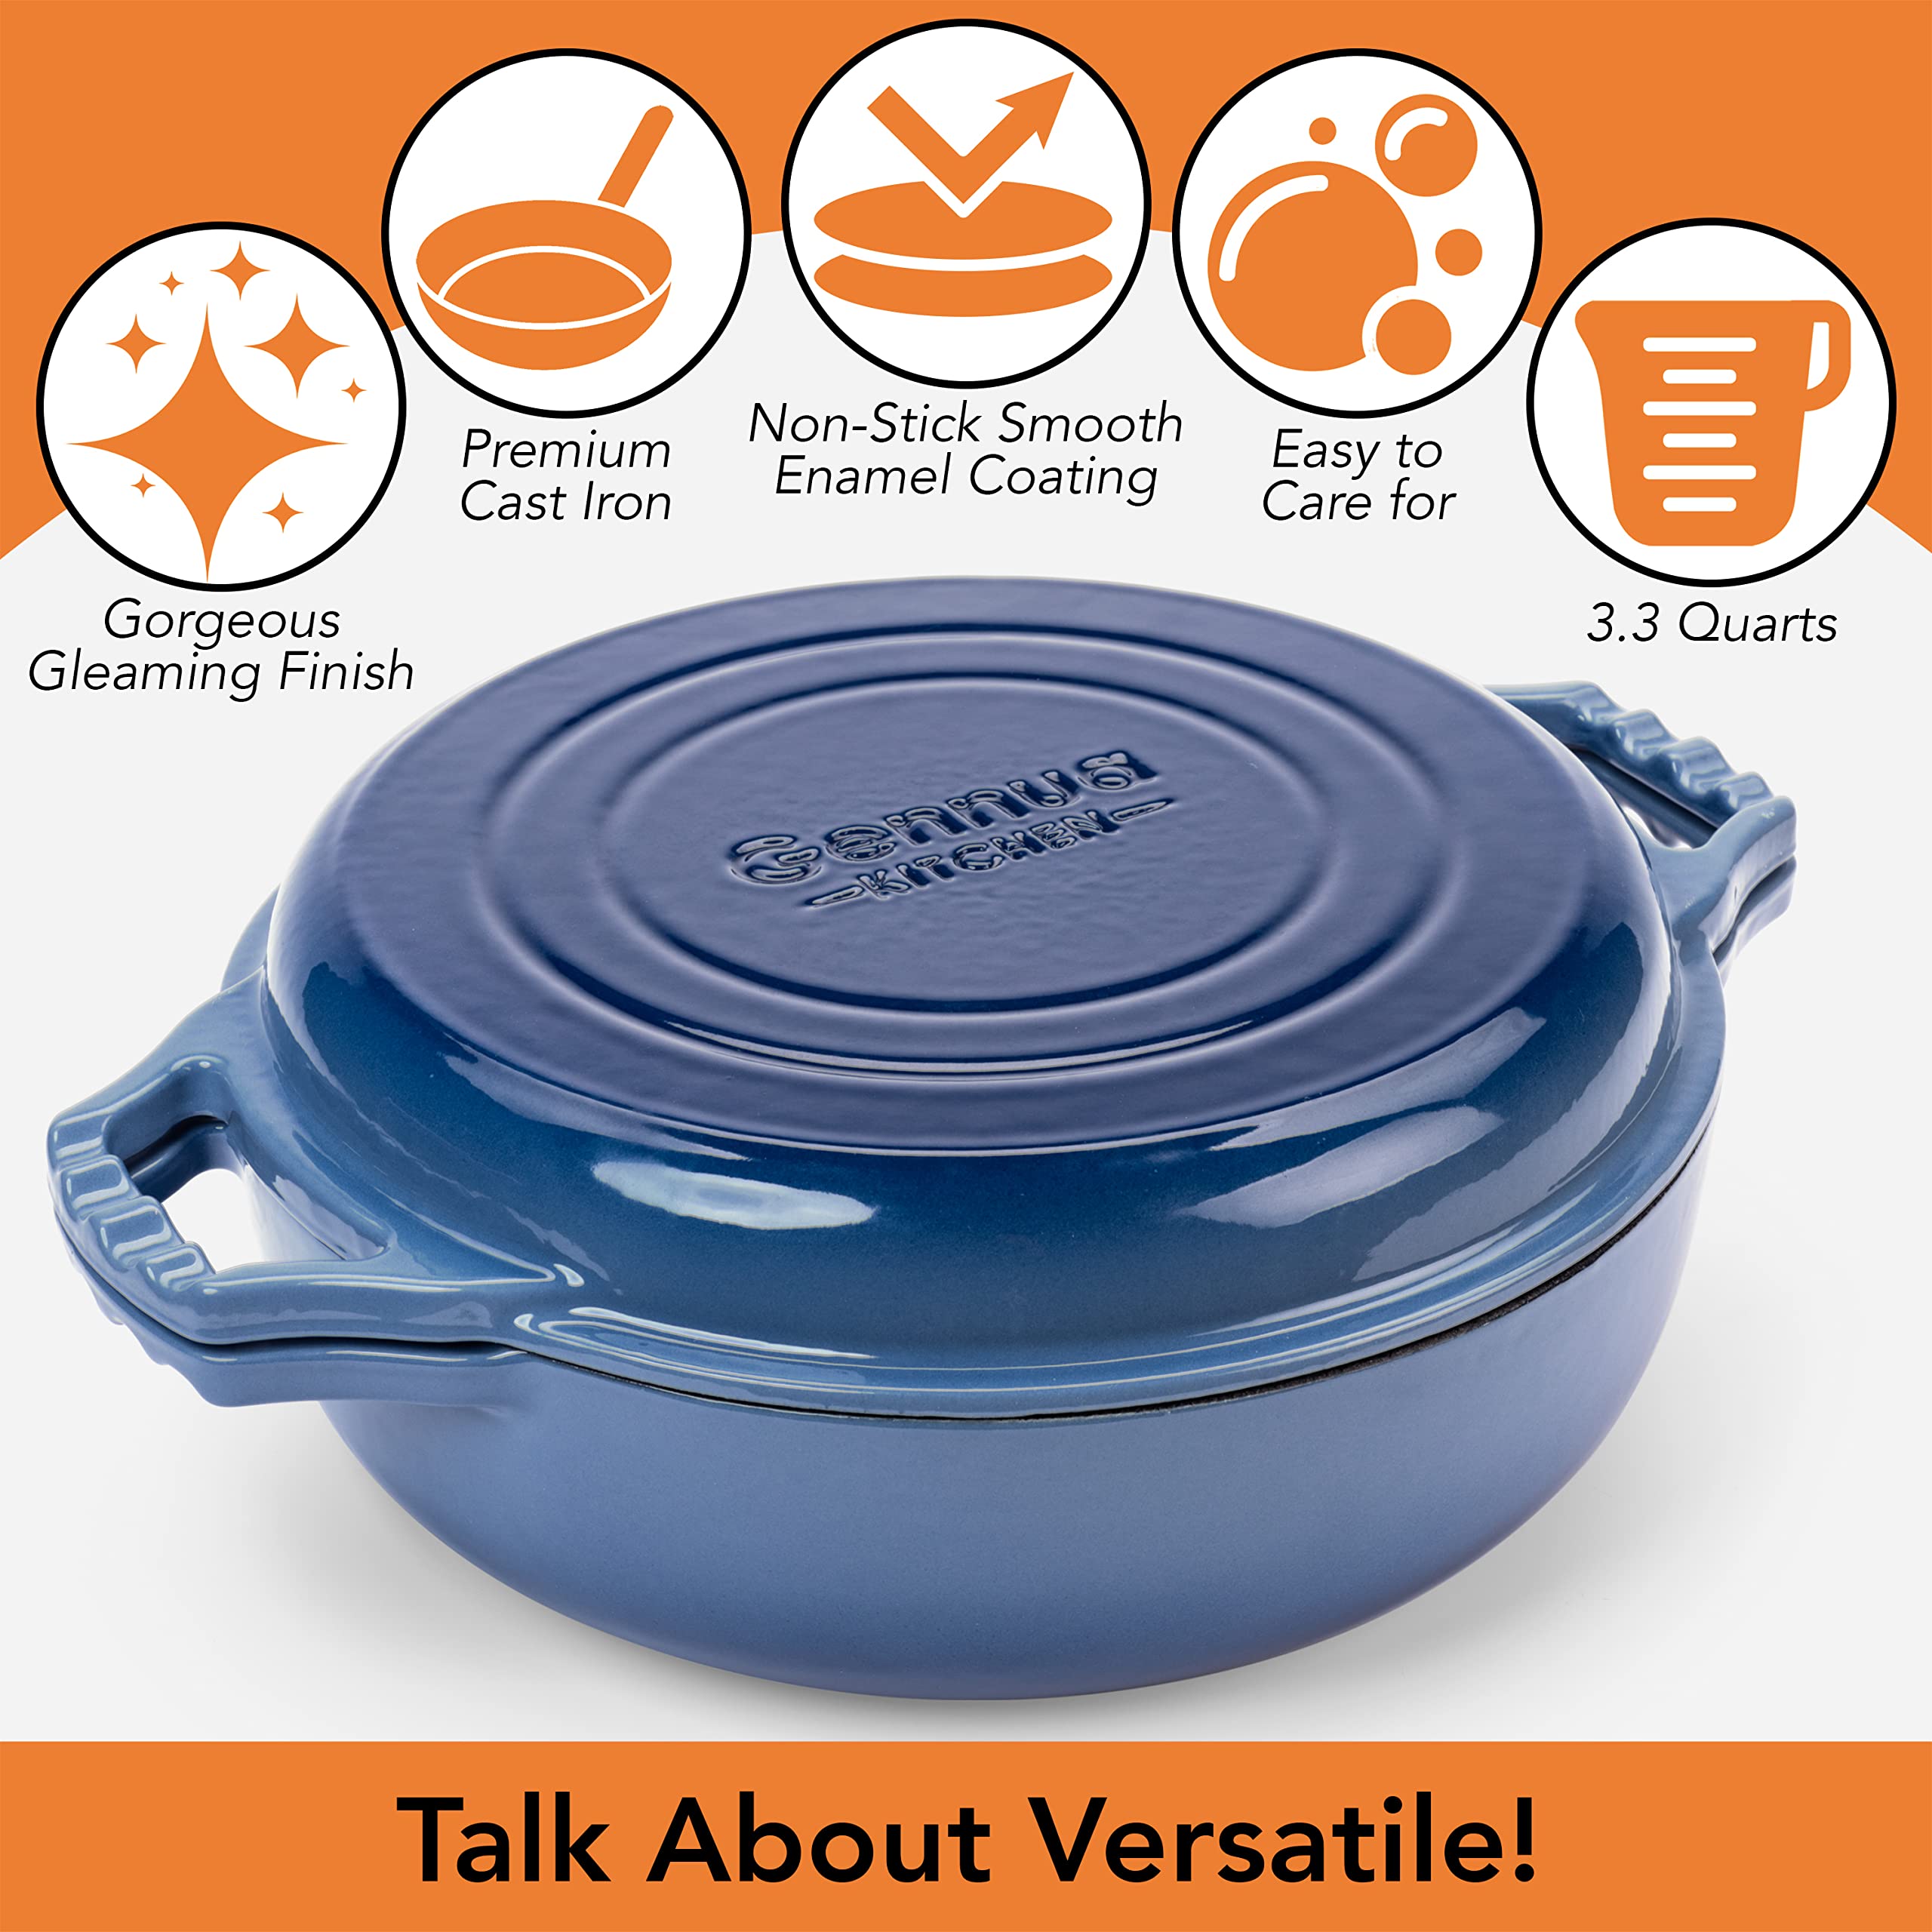 Gennua 3.3-Quart Enameled Cast Iron Braiser with Grill Lid - Small Dutch Oven and Stovetop Grill Pan